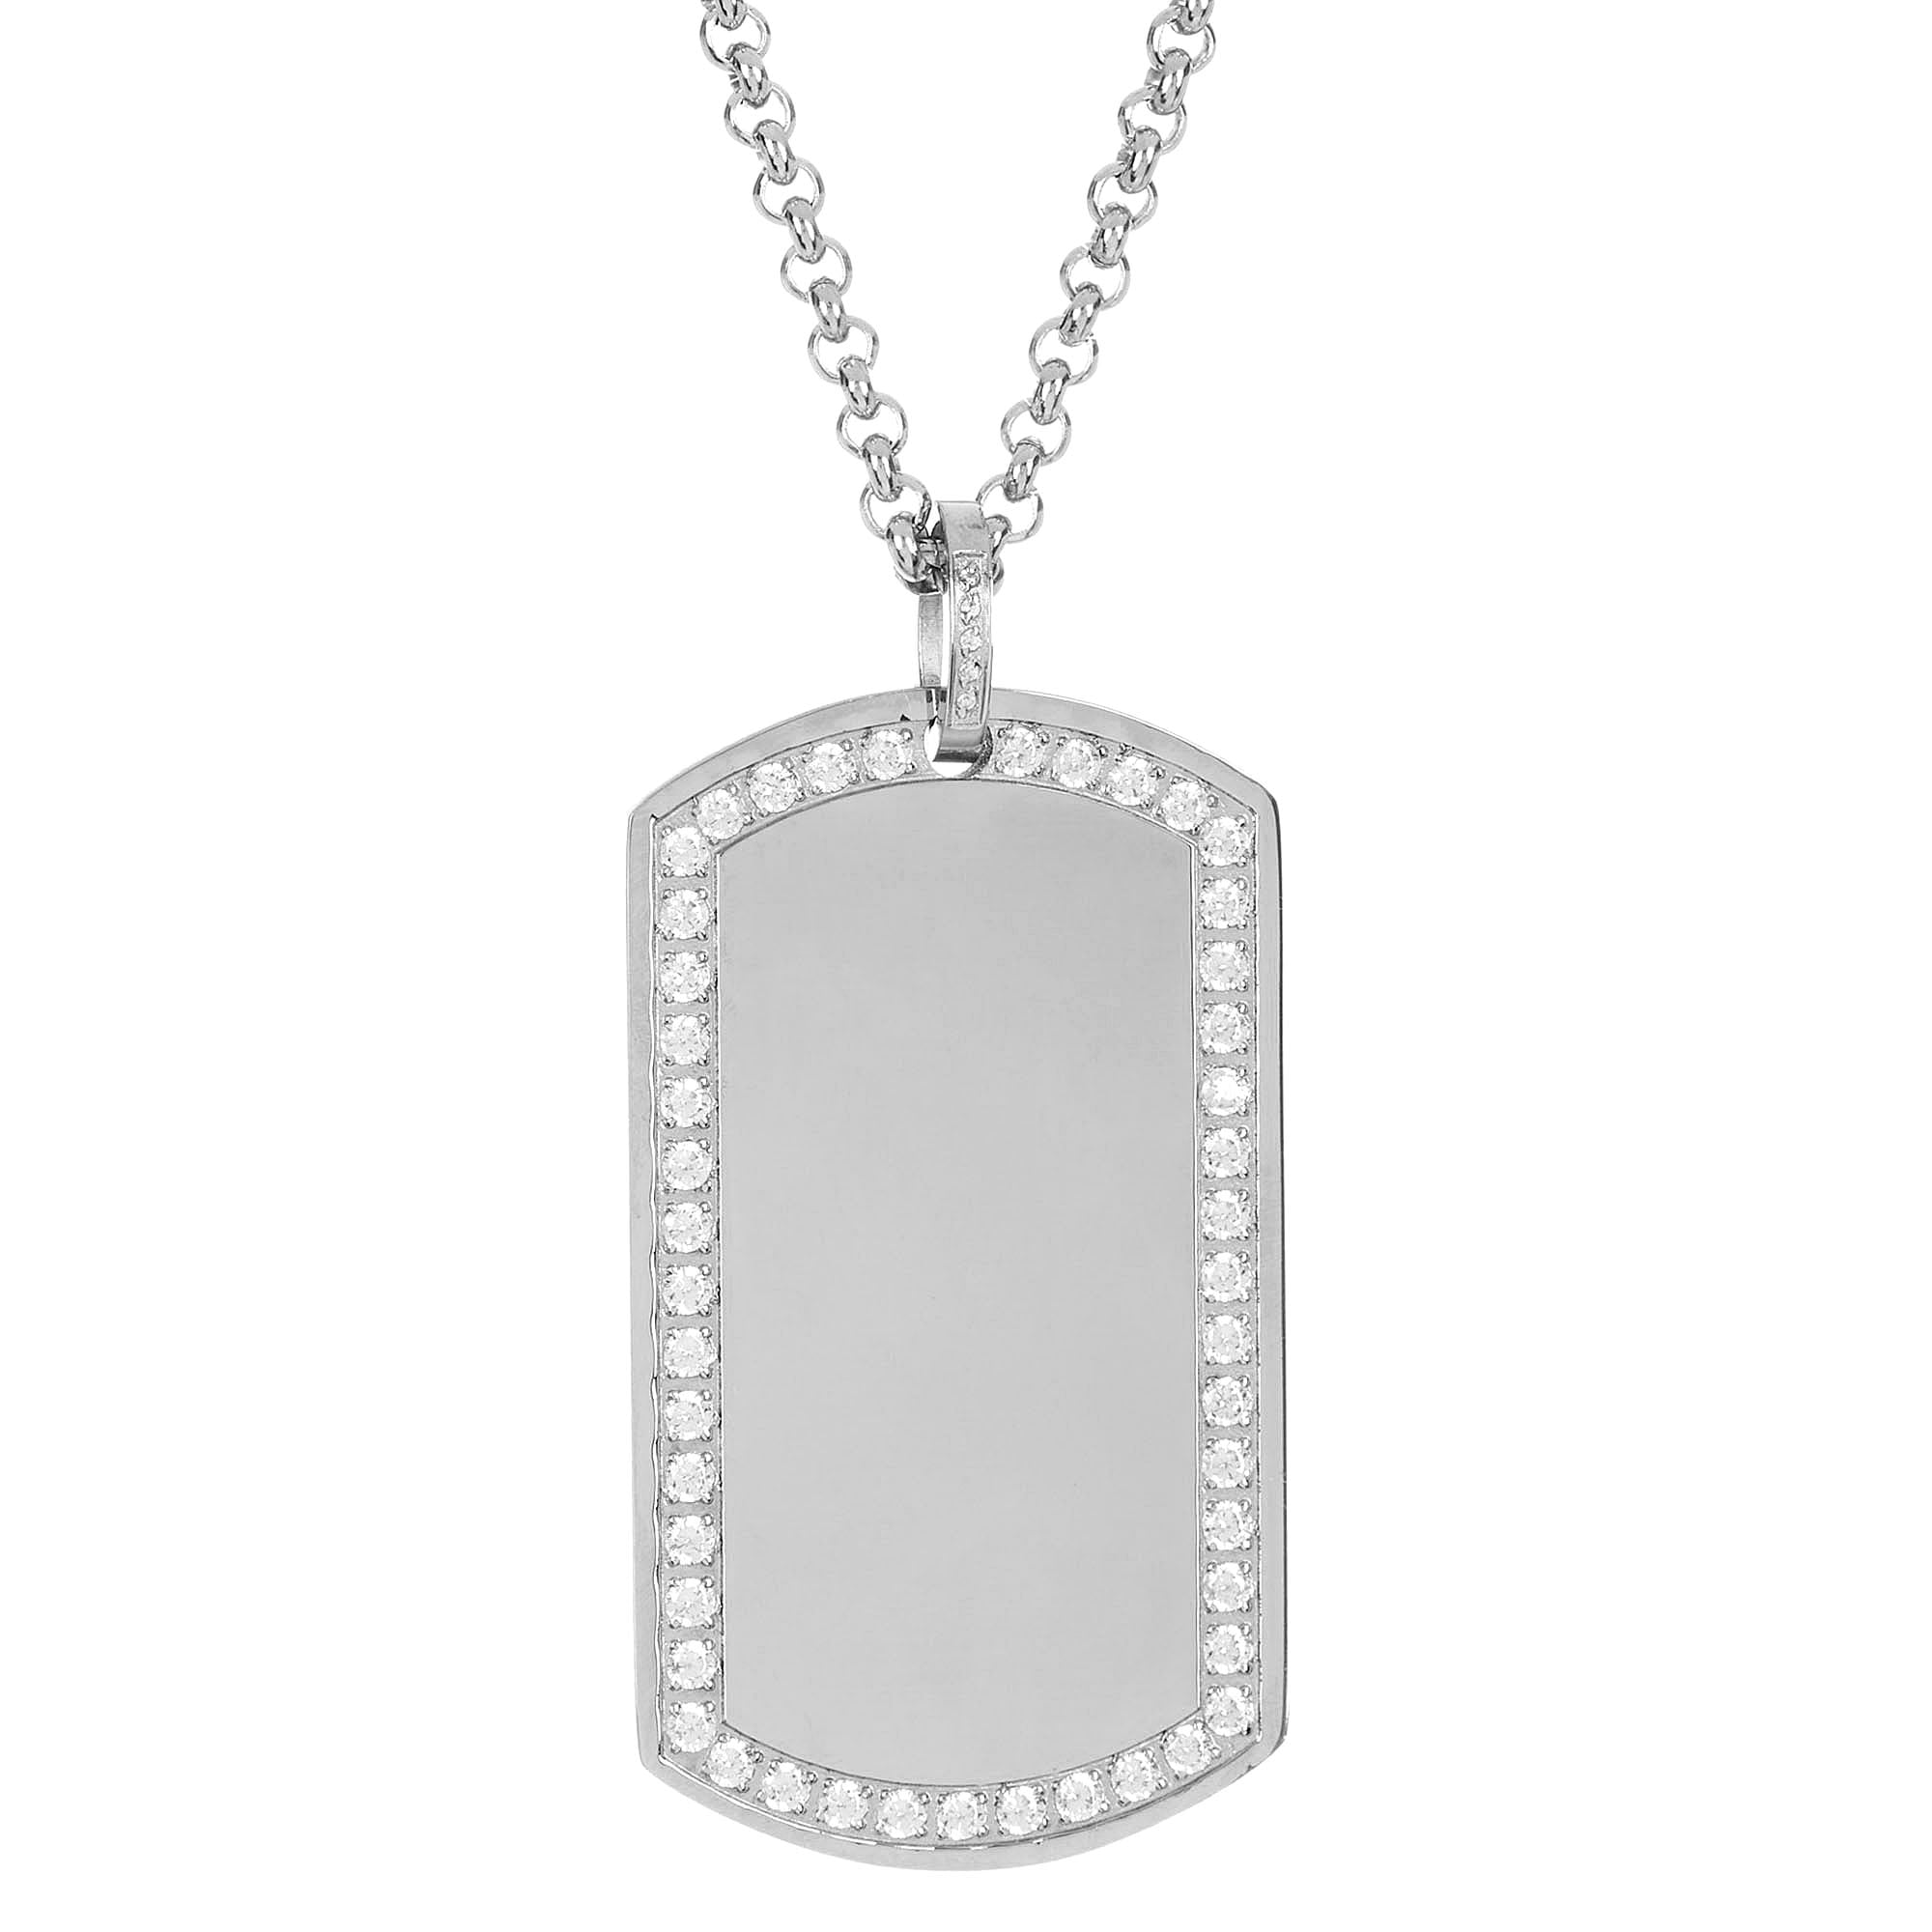 Men's Cubic Zirconia Gold Tone Stainless Steel Dog Tag Necklace